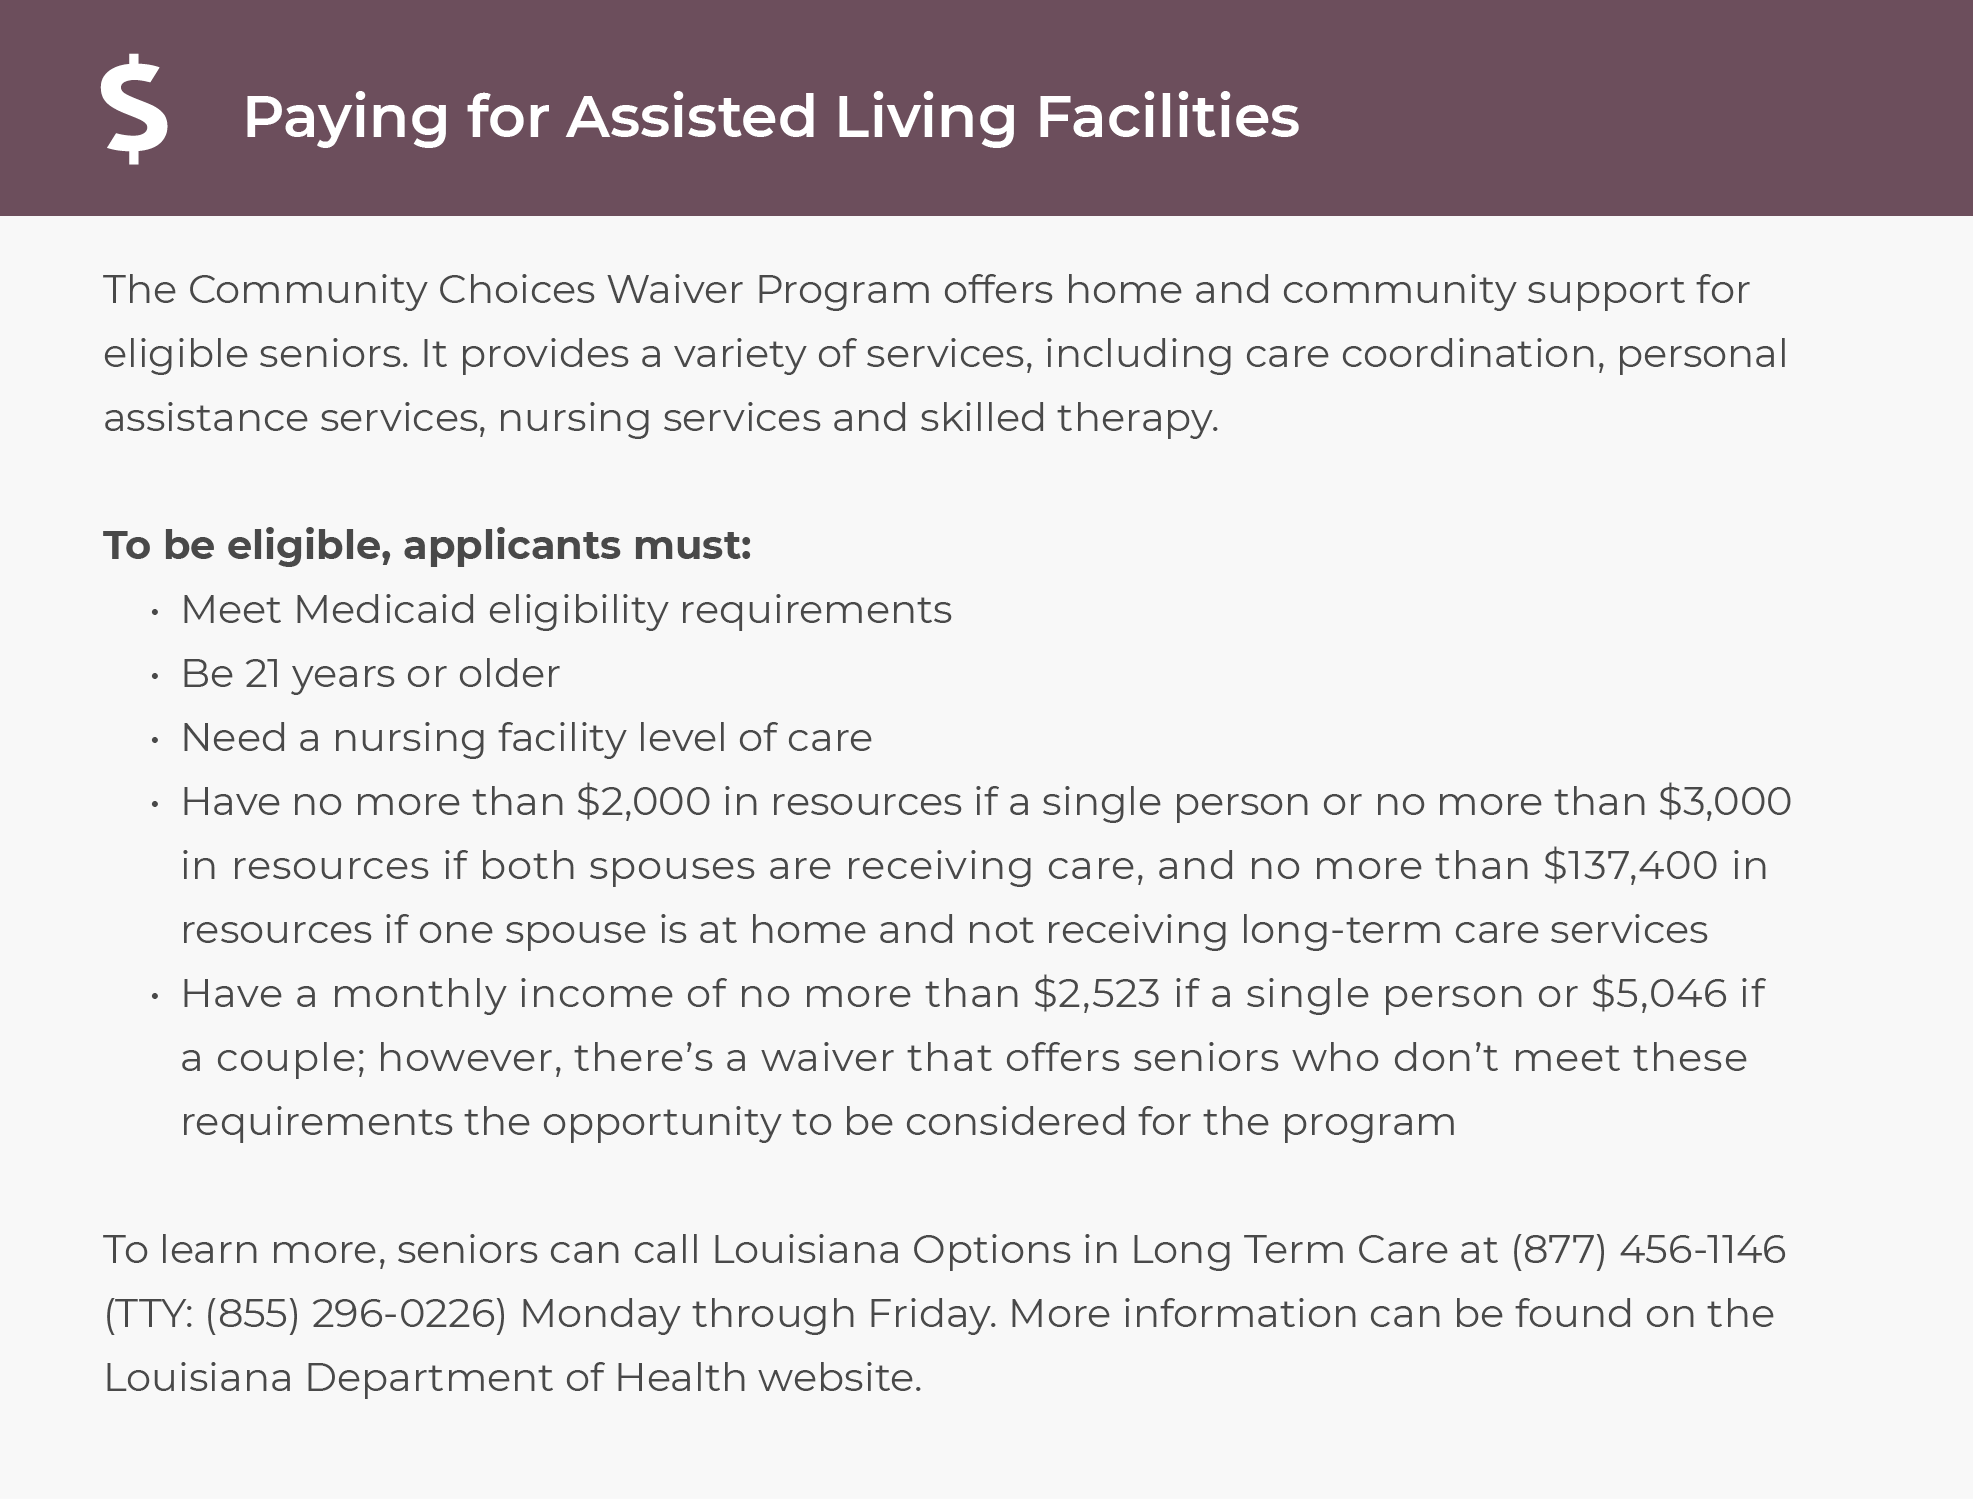 Paying for assisted living in Louisiana